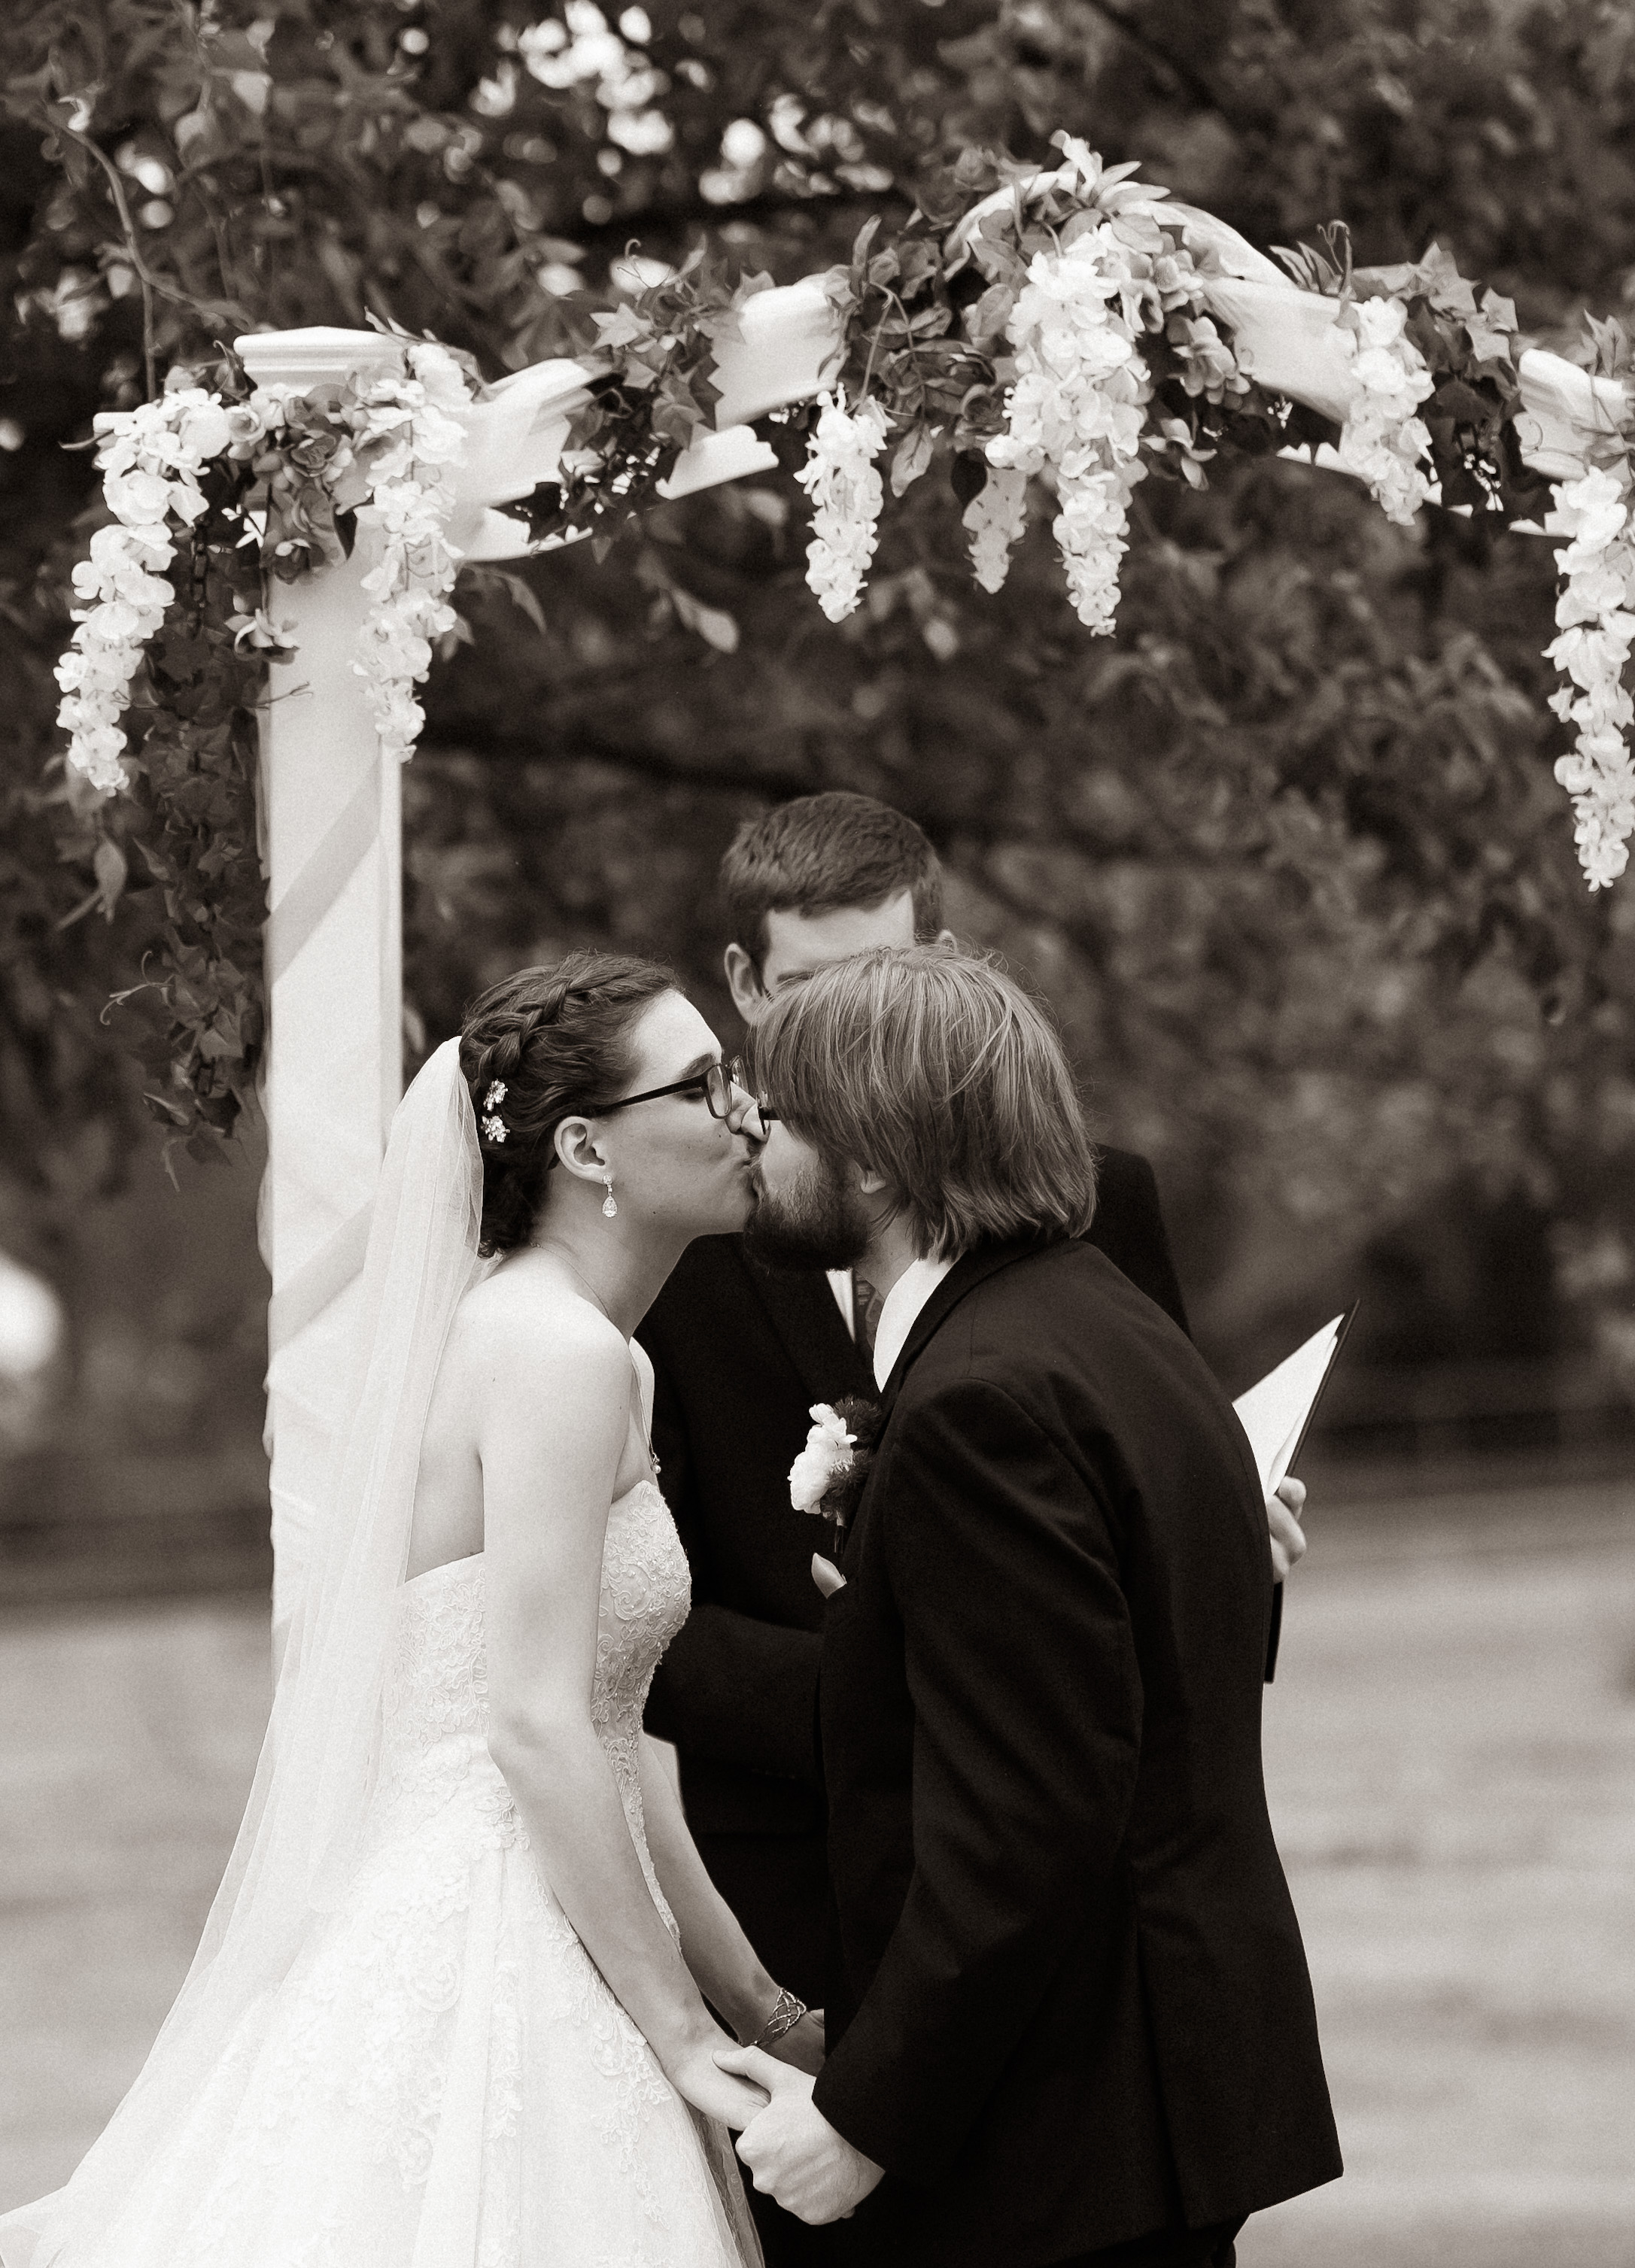 A grayscale photo of the kiss from my wedding.  Gwen is visible on the left, I'm on the right, and our officiant, who you may recognize as Cory from Board Brains, is behind us in the middle.